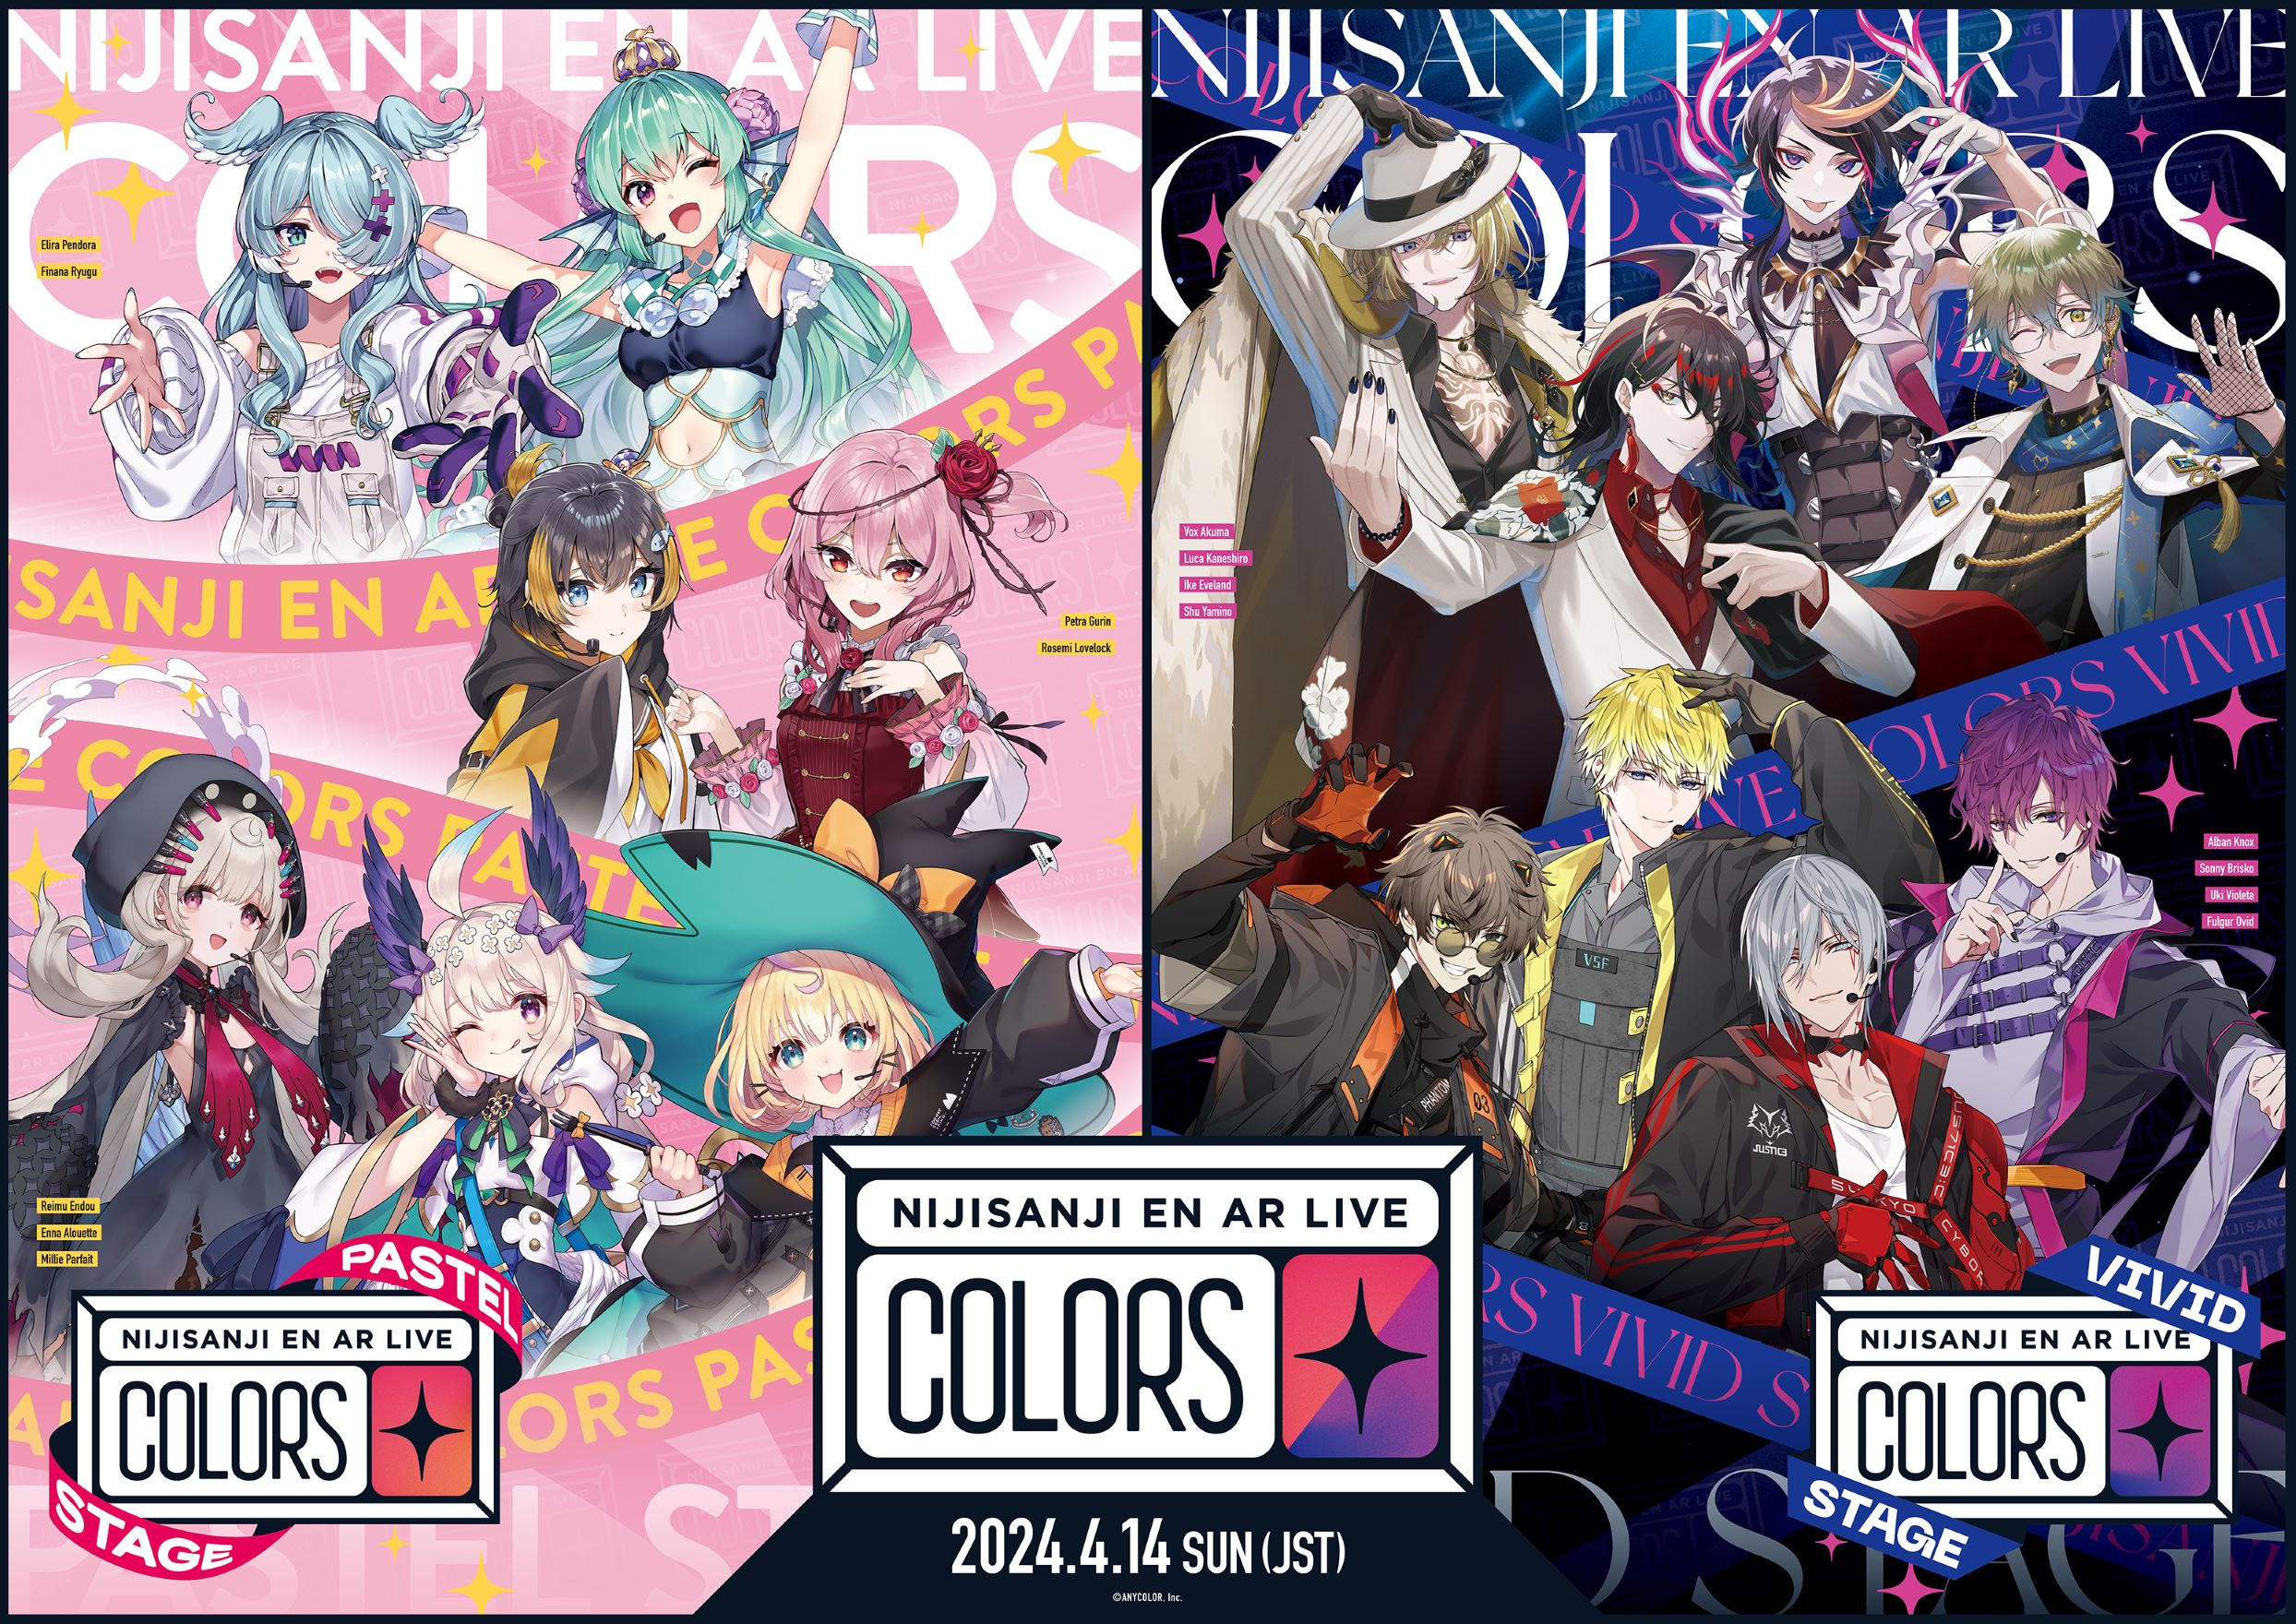 Sony’s Stagecrowd To Livestream NIJISANJI EN AR LIVE “COLORS” Event cover